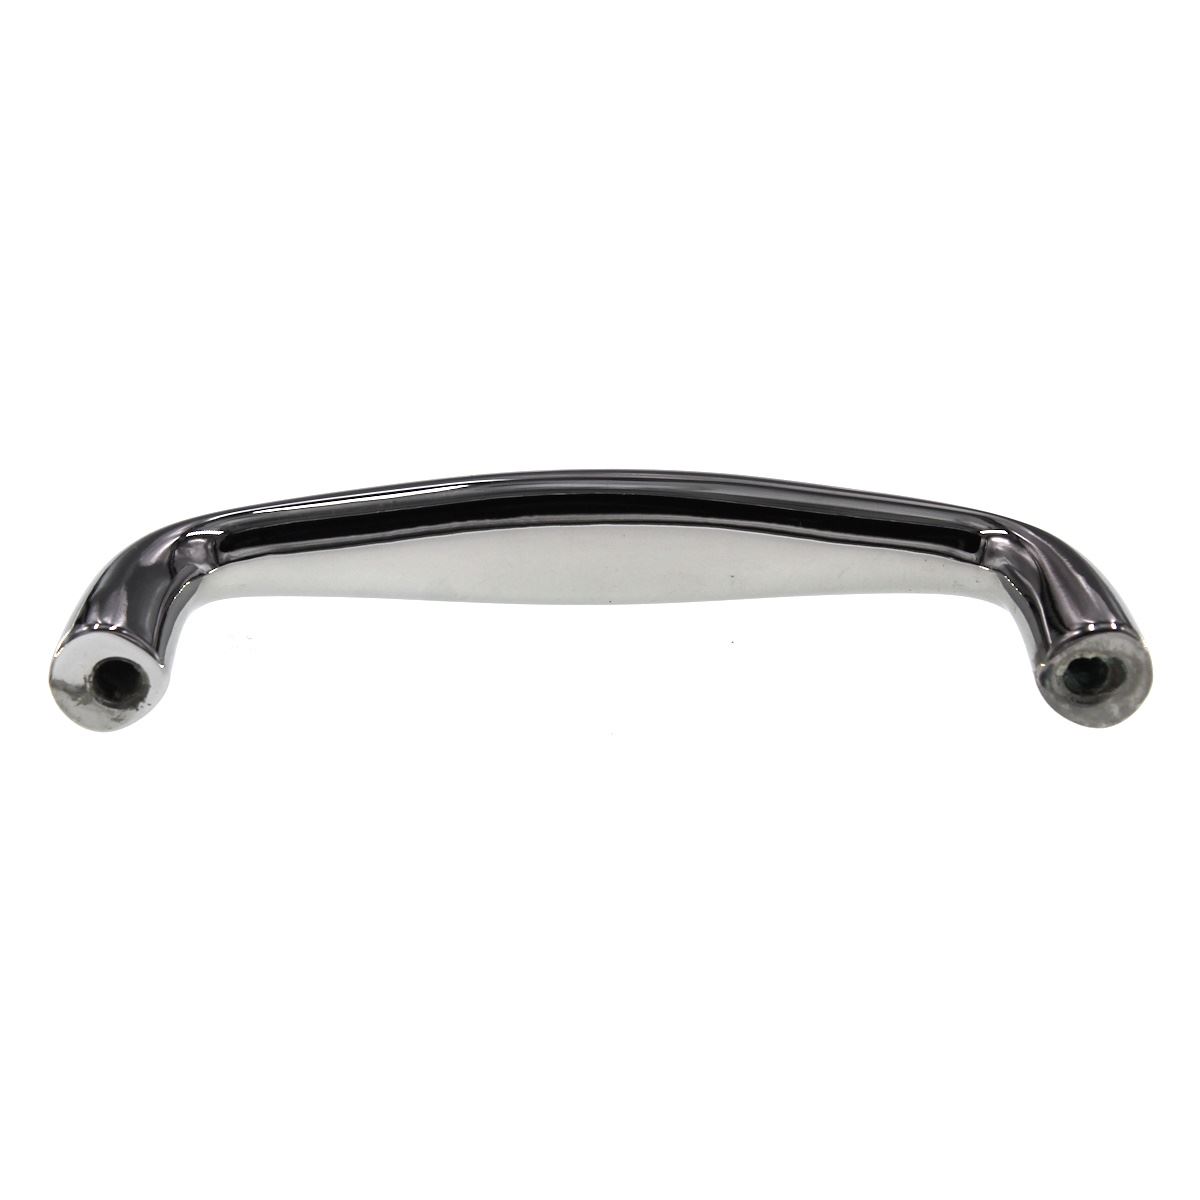 Schaub And Company Traditional Cabinet Arch Pull 3" Ctr Polished Chrome 721-26